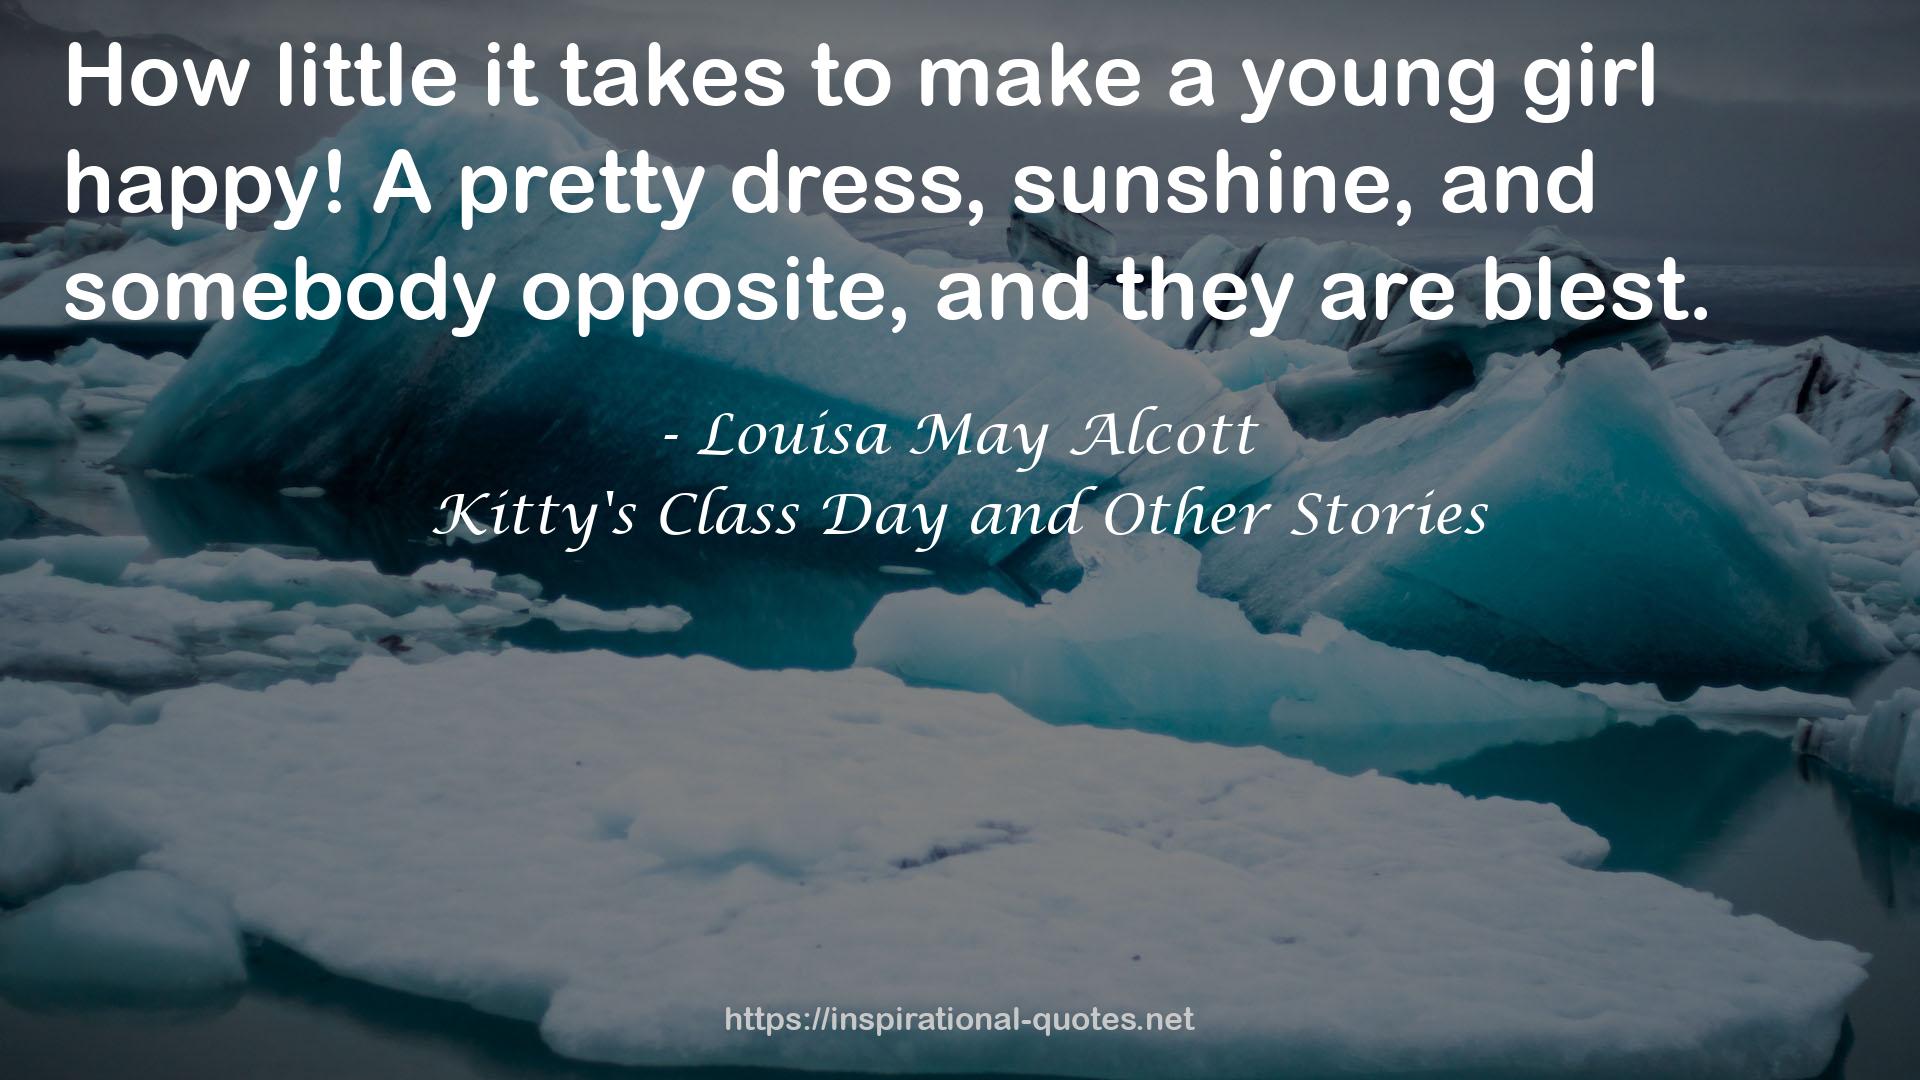 Kitty's Class Day and Other Stories QUOTES